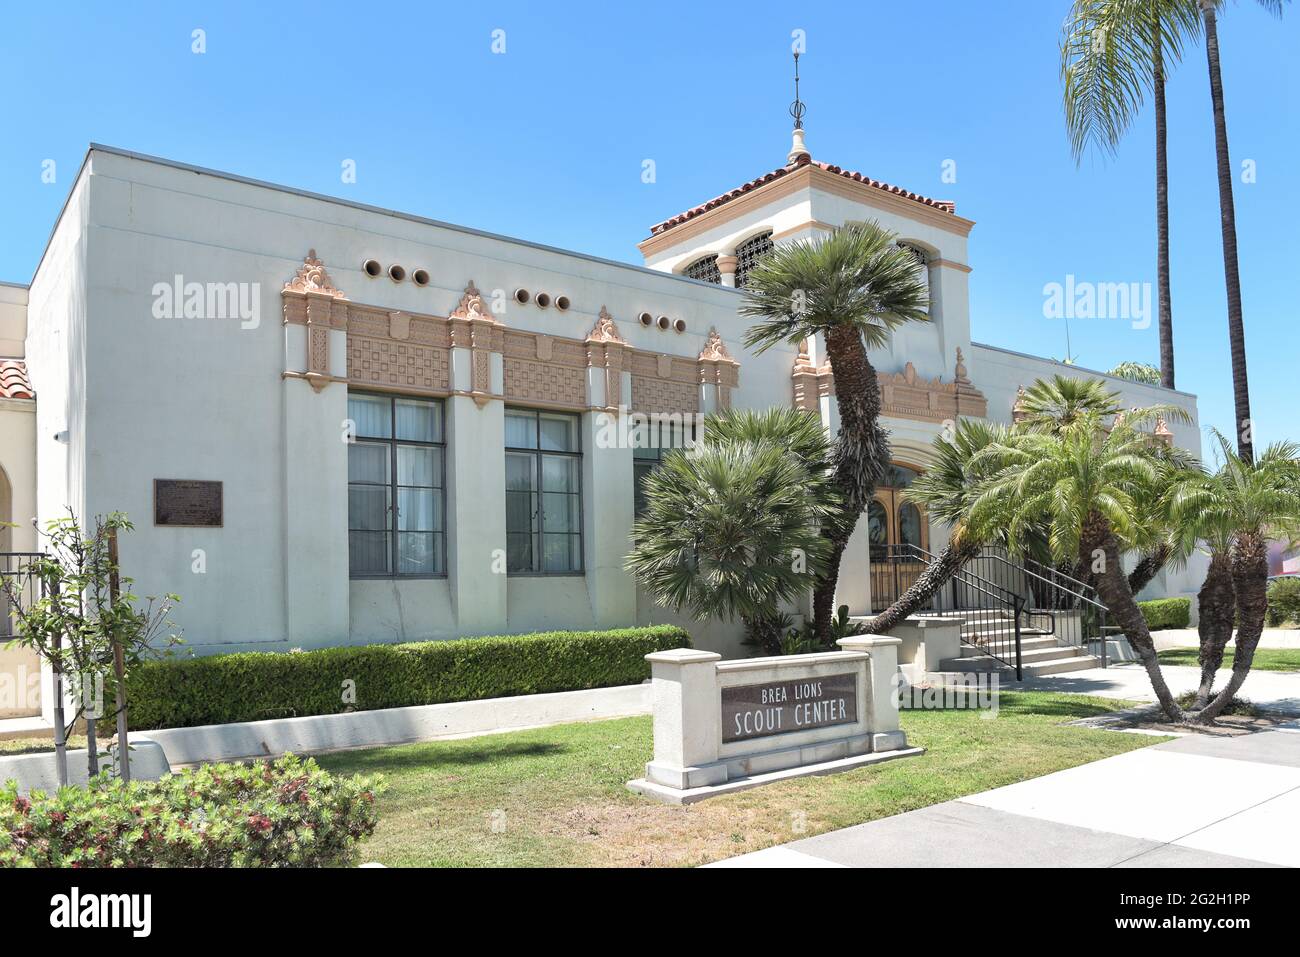 BREA, CALIFORNIA - 9 JUN 2021: The Lions Scout Center, home for Brea Boy Scouts and Girl Scouts, in City Hall Park. Stock Photo